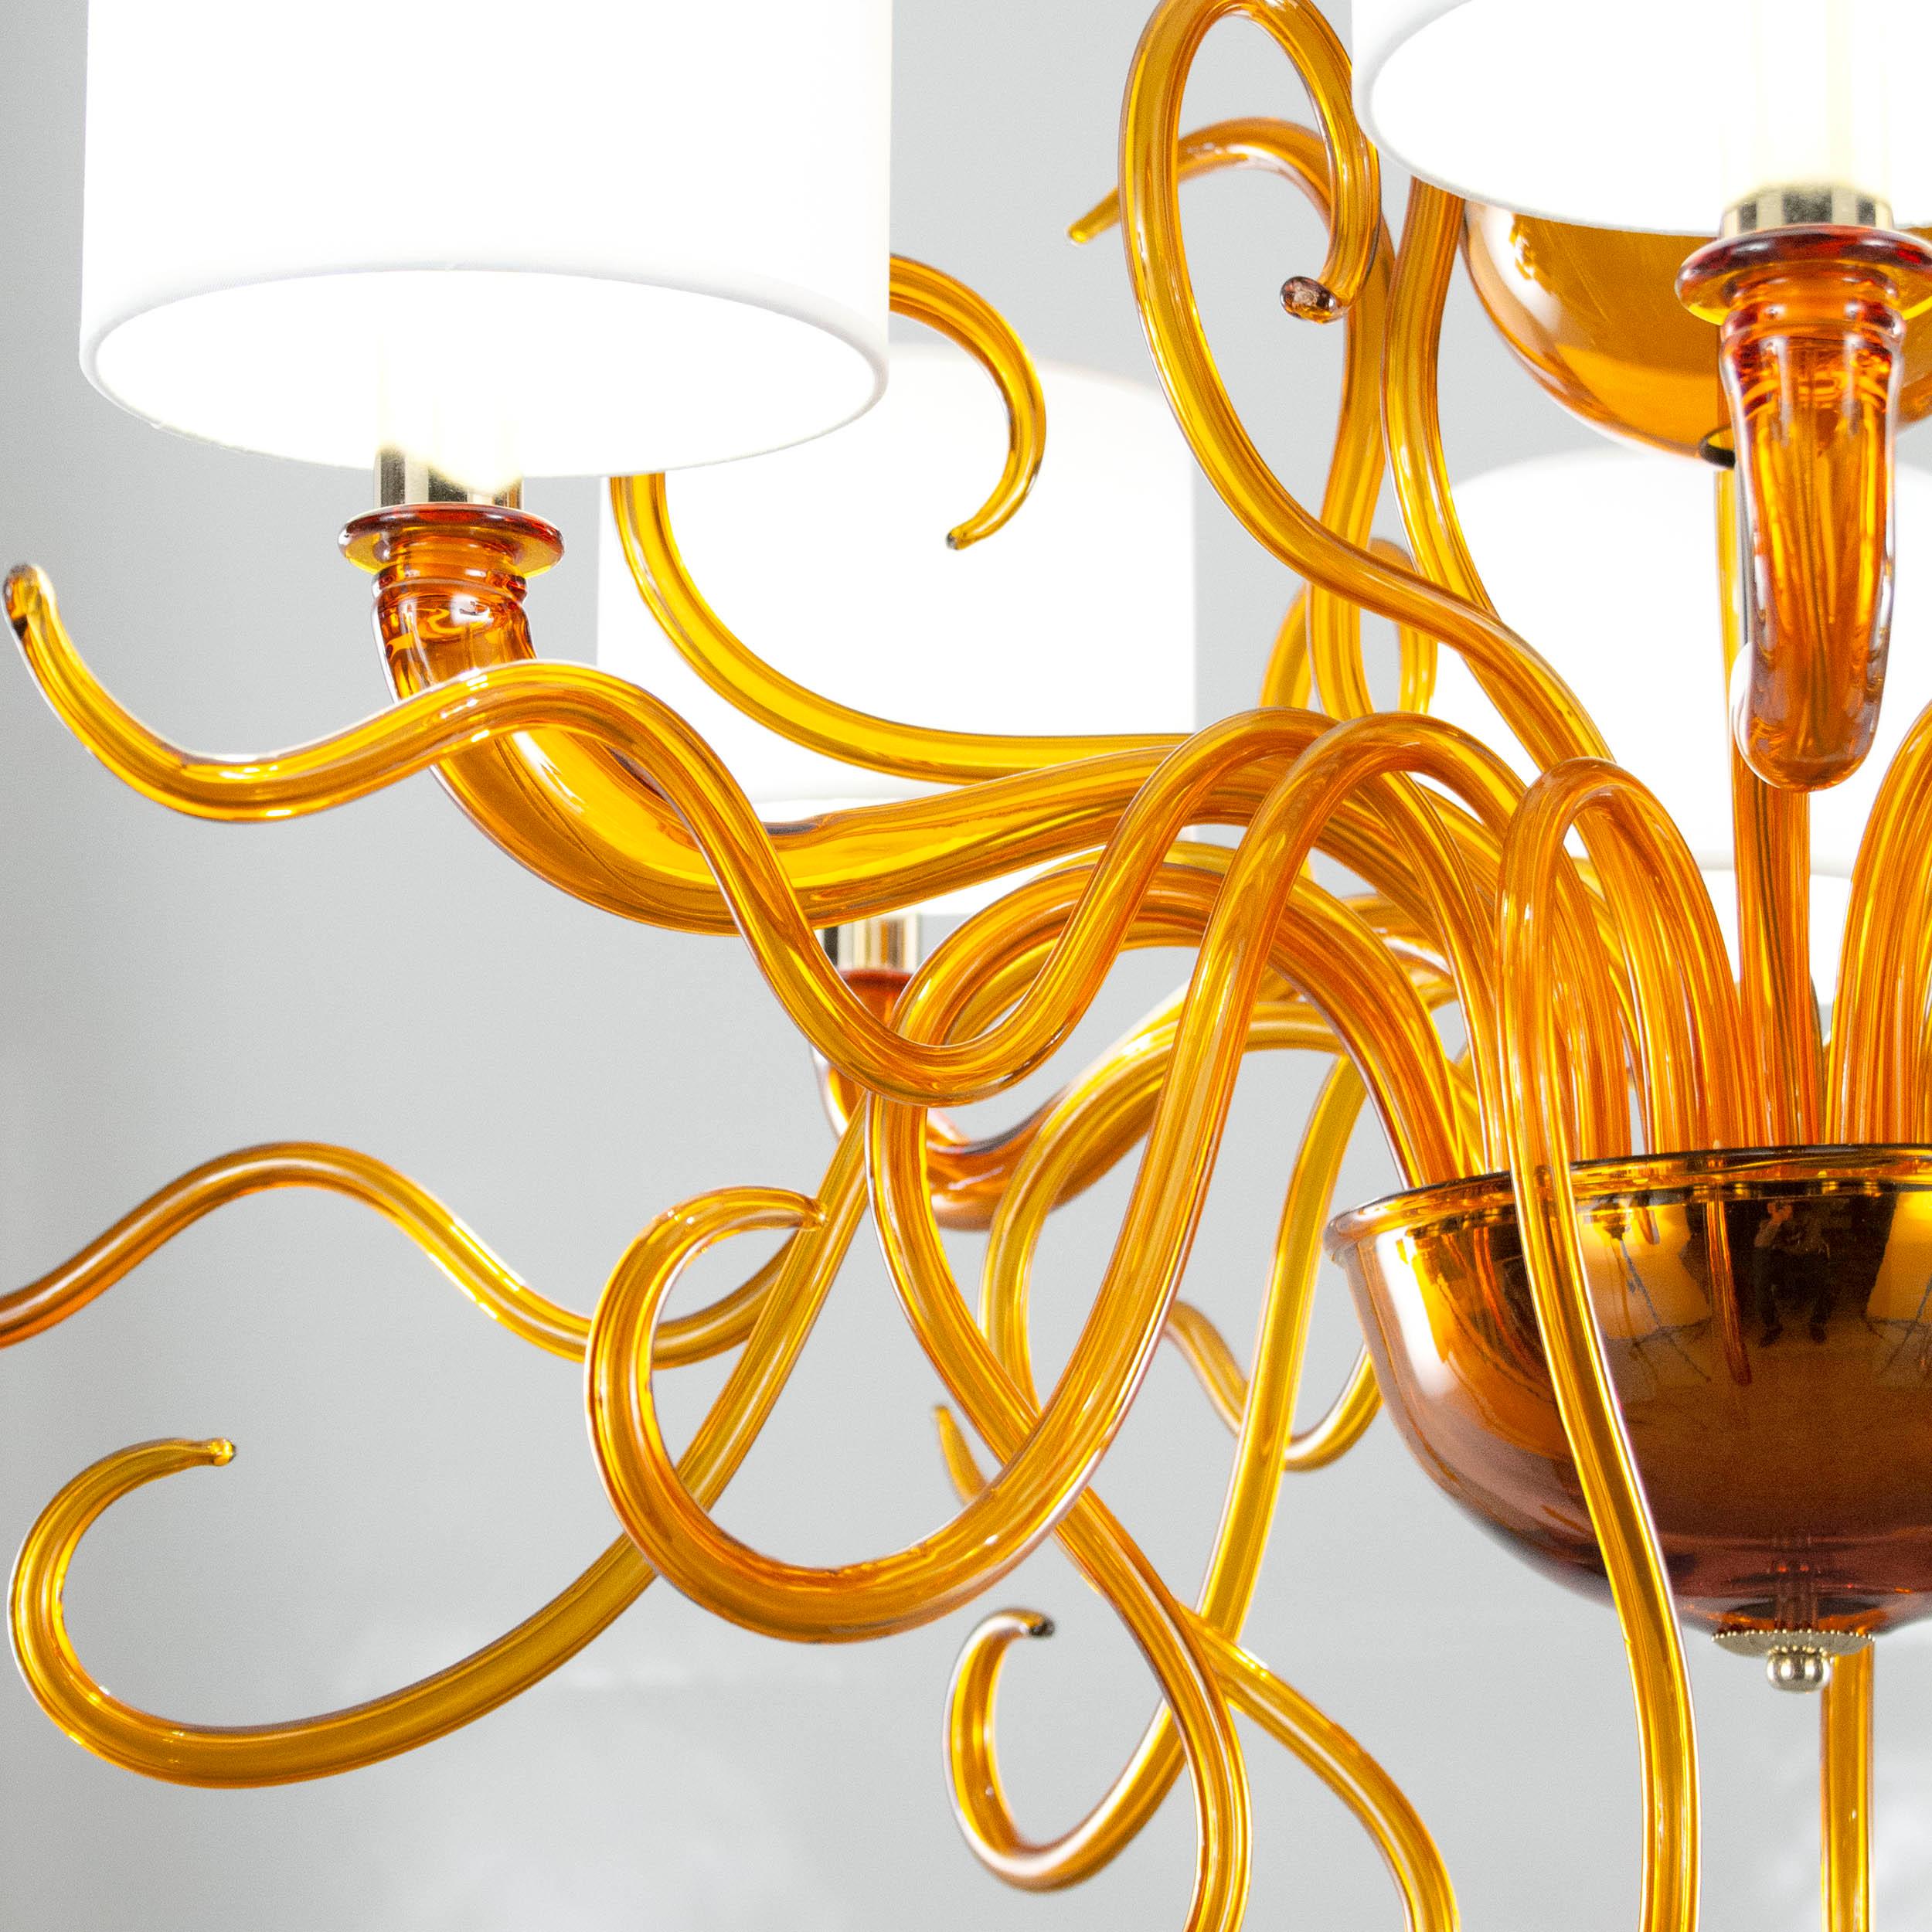 Tourbillon chandelier with 6 lights. Amber Murano glass. White cotton lampshades by Multiforme

The contemporary Murano chandelier Tourbillon is characterized by a modern style and by organic and fluid shapes. It represents a new way of conceiving